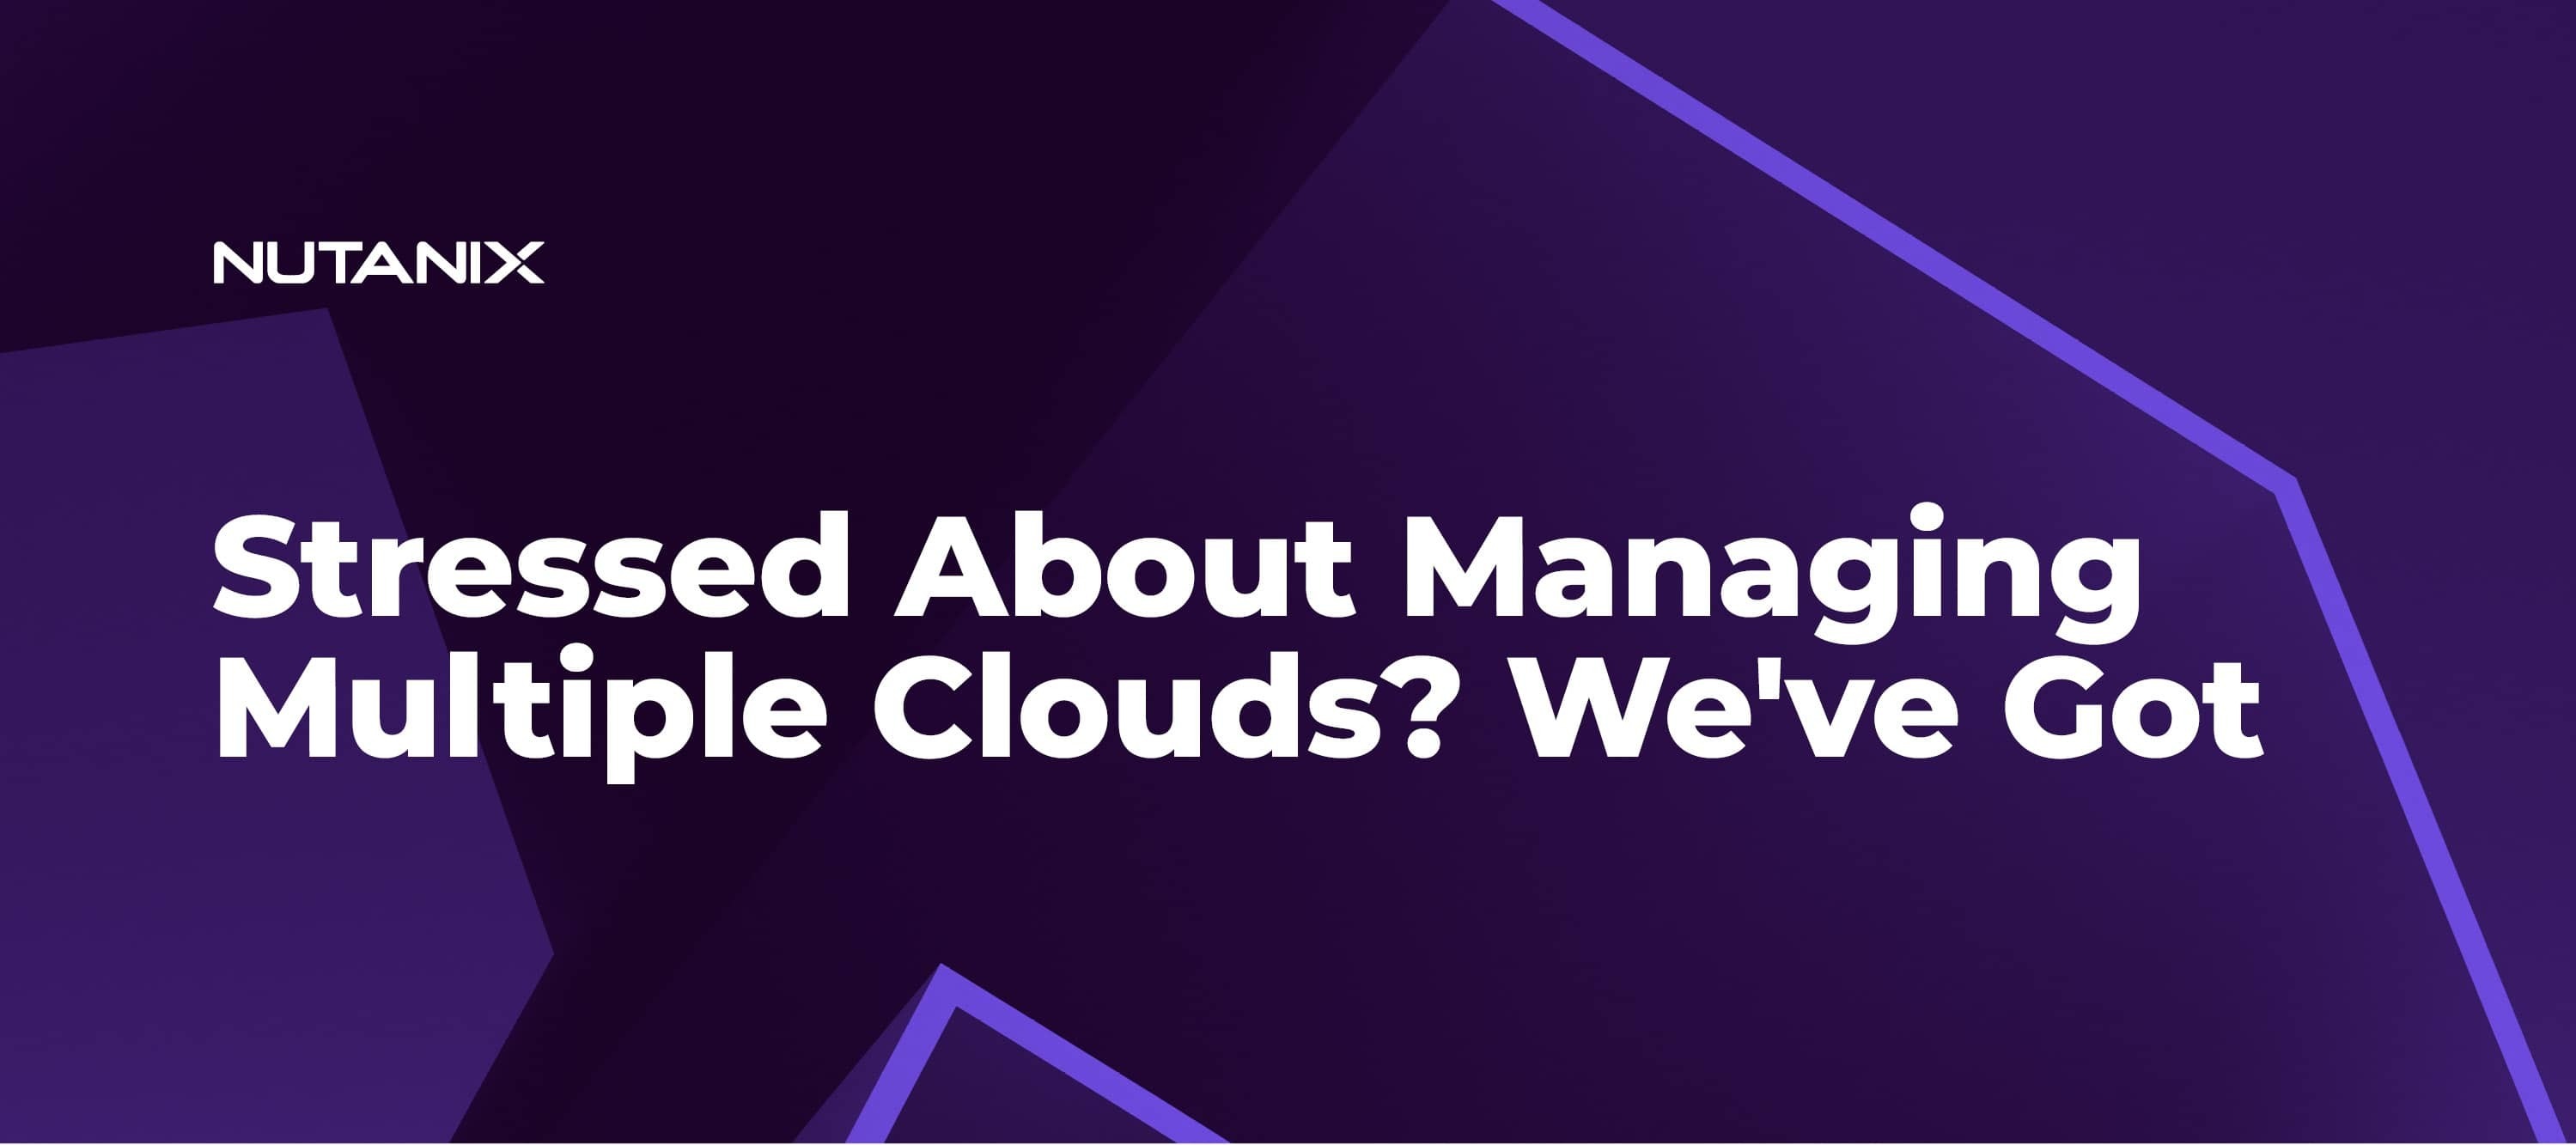 Stressed About Managing Multiple Clouds? We've Got Your Back!